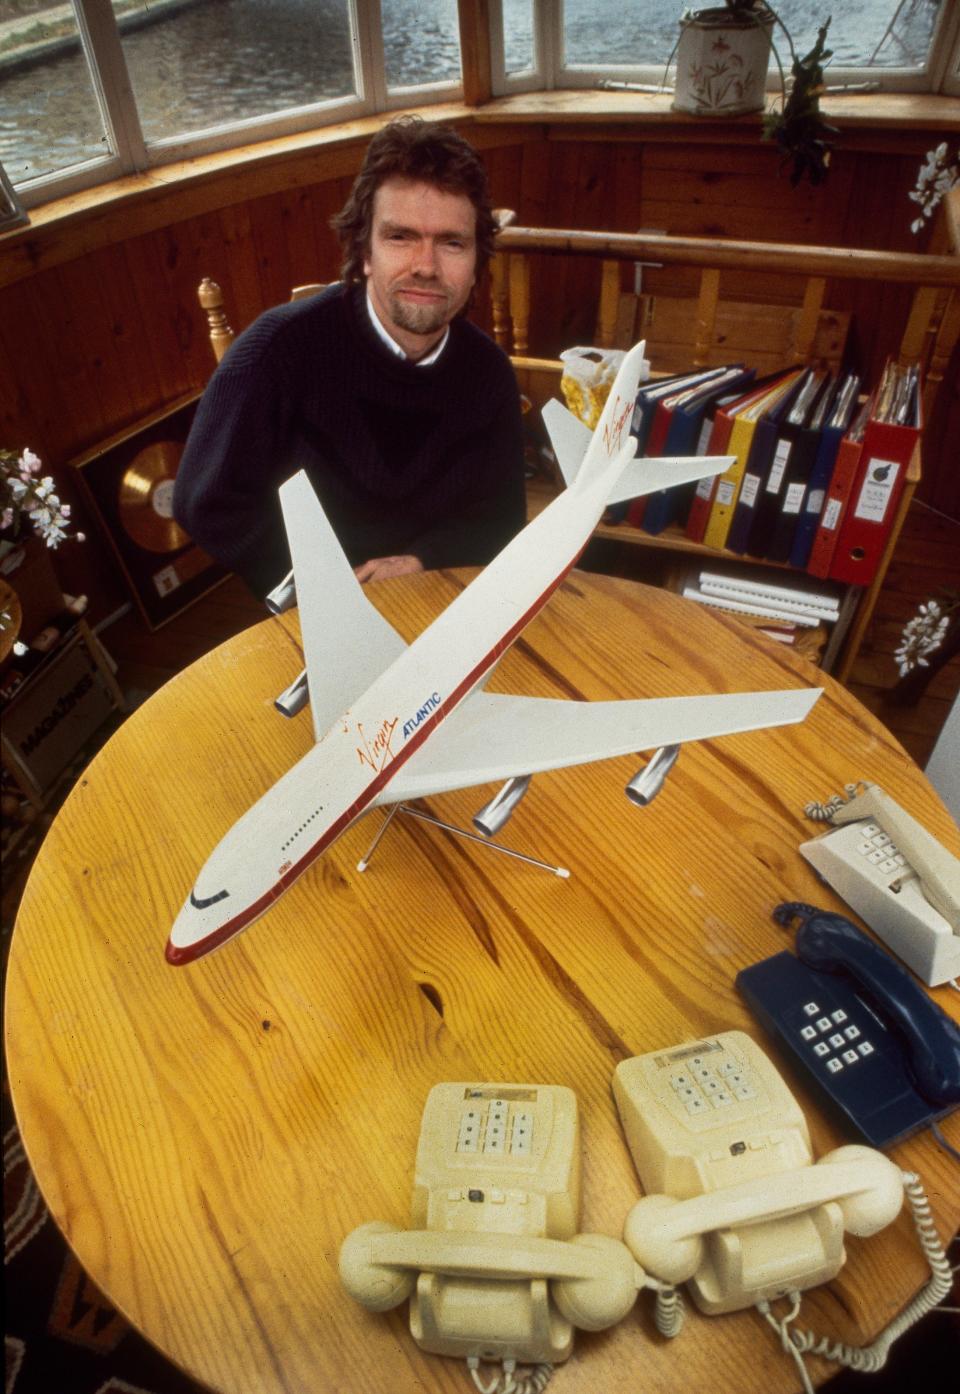 Richard Branson photographed in London in March 1984 sitting at a table with a model of a Virgin Atlantic Airways Boeing 747.